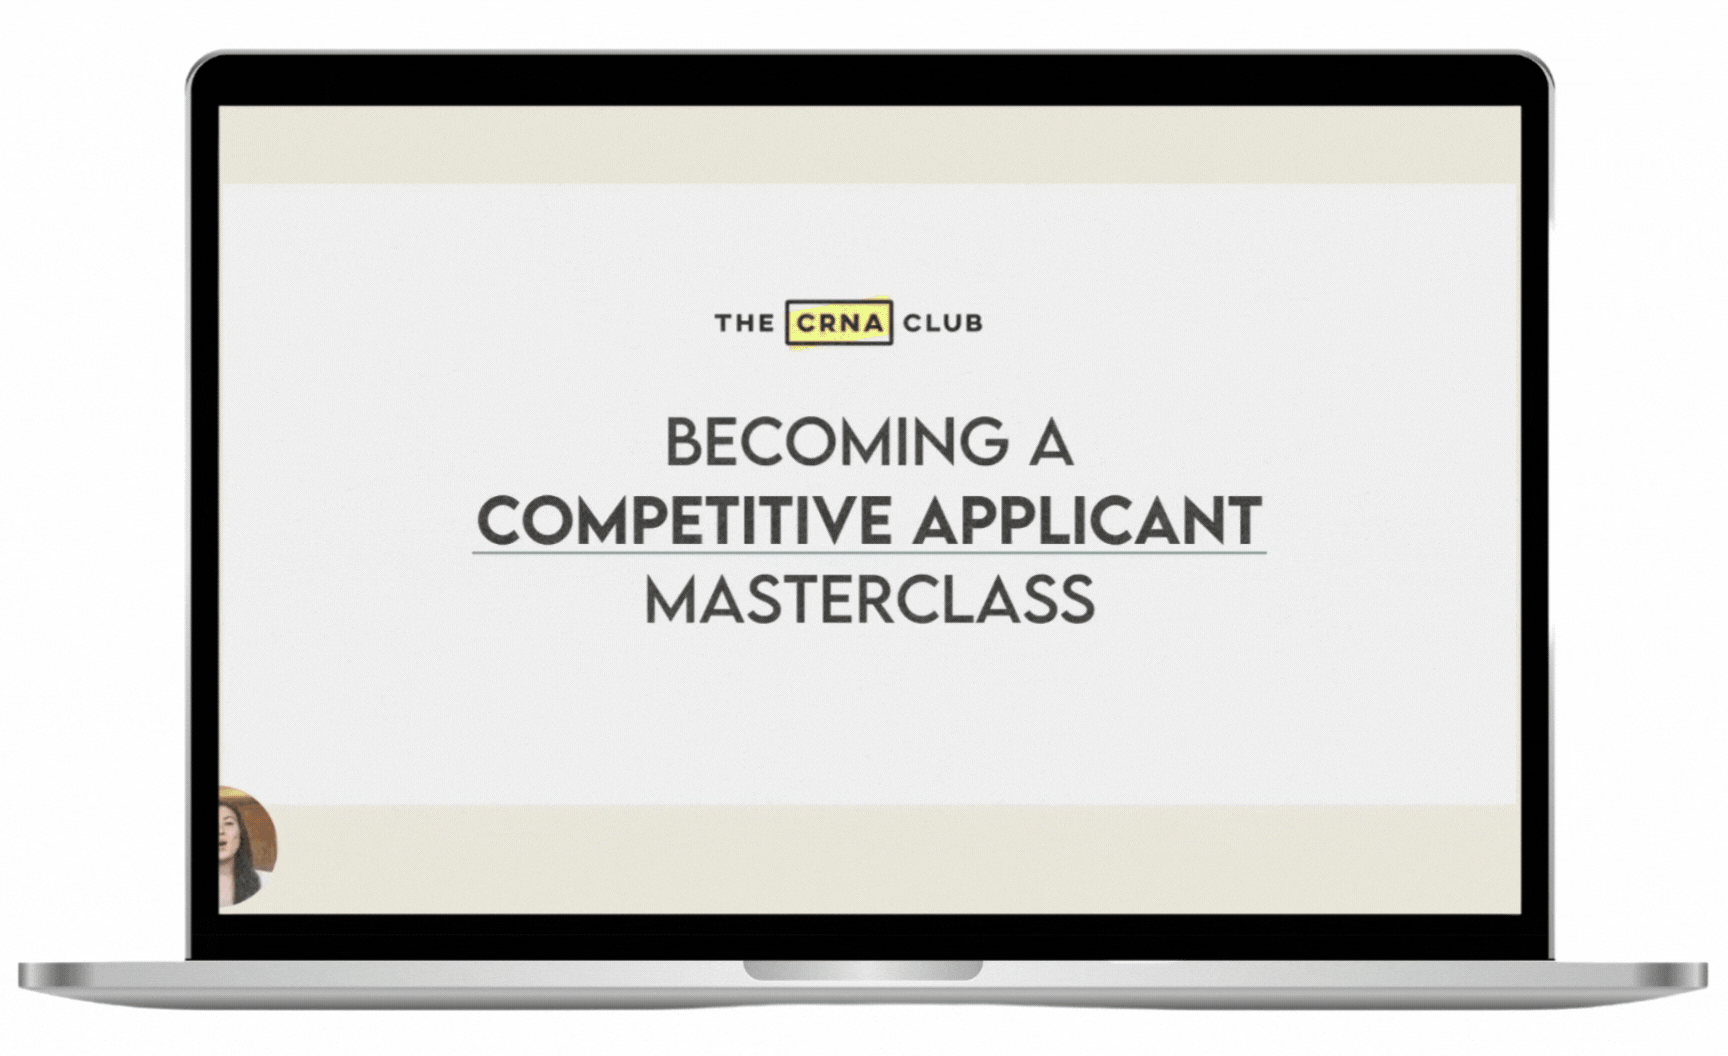 Learn how to become a competitive CRNA school applicant with my free masterclass